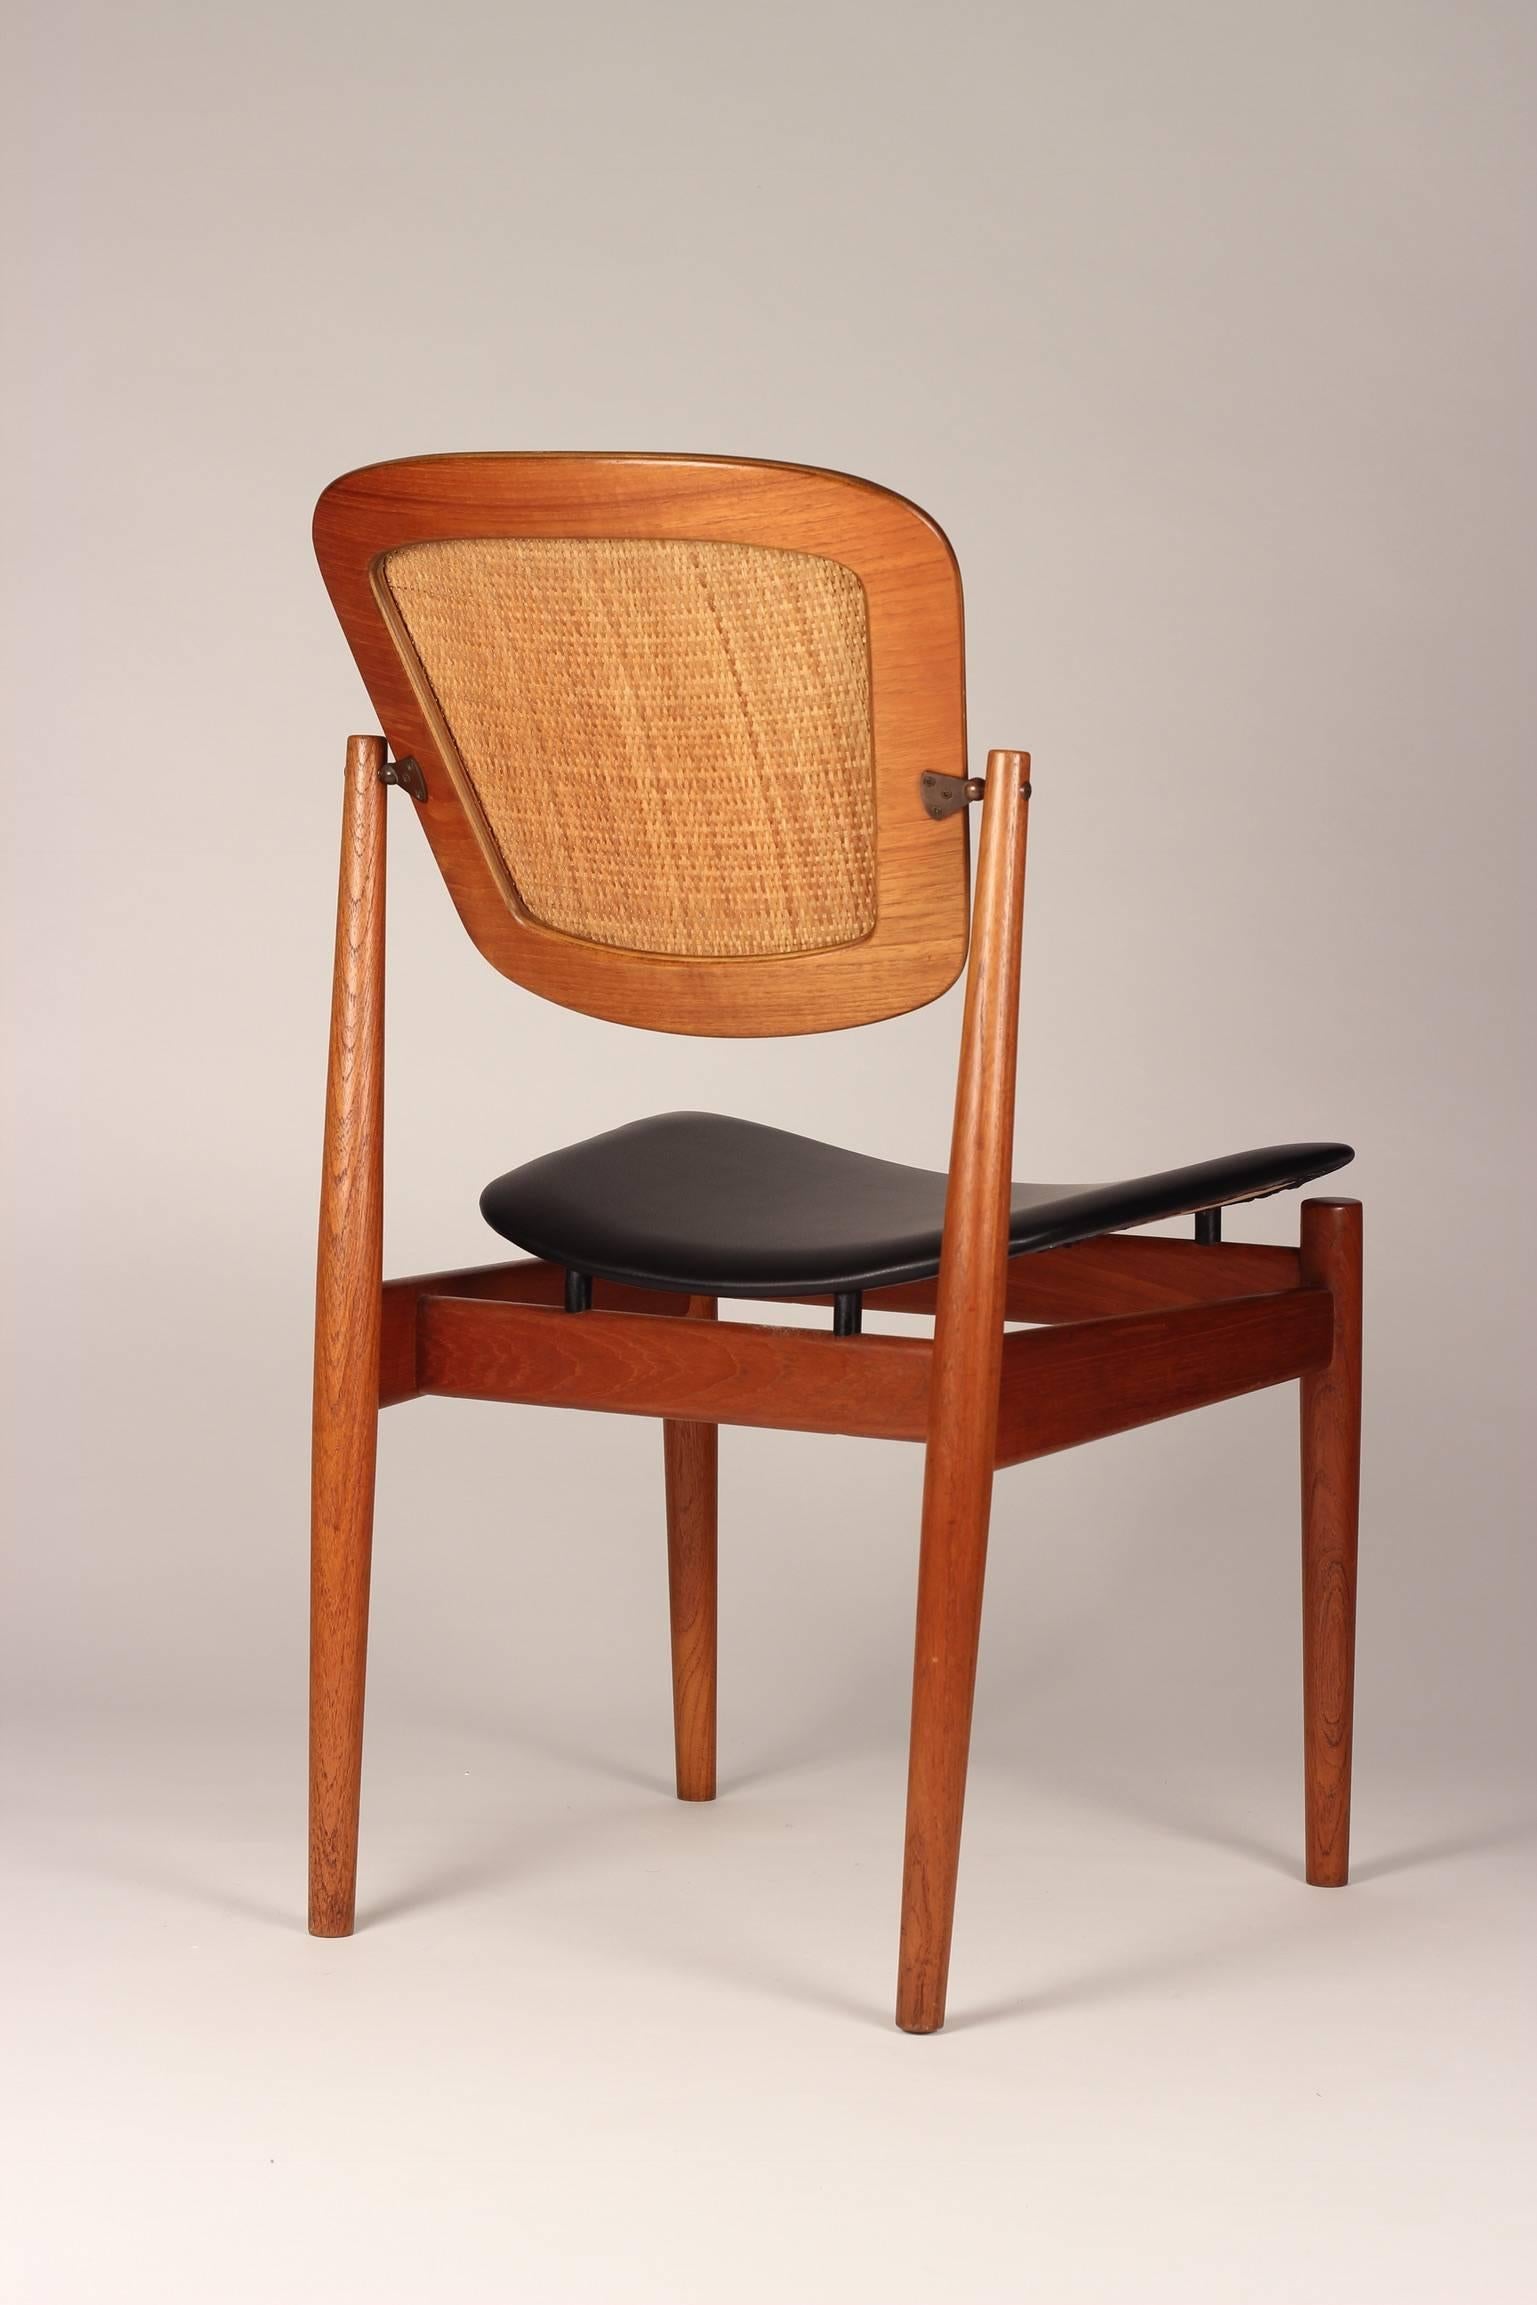 Mid-20th Century Danish Desk Chair by Arne Vodder in Teak, Cane and Black Leather